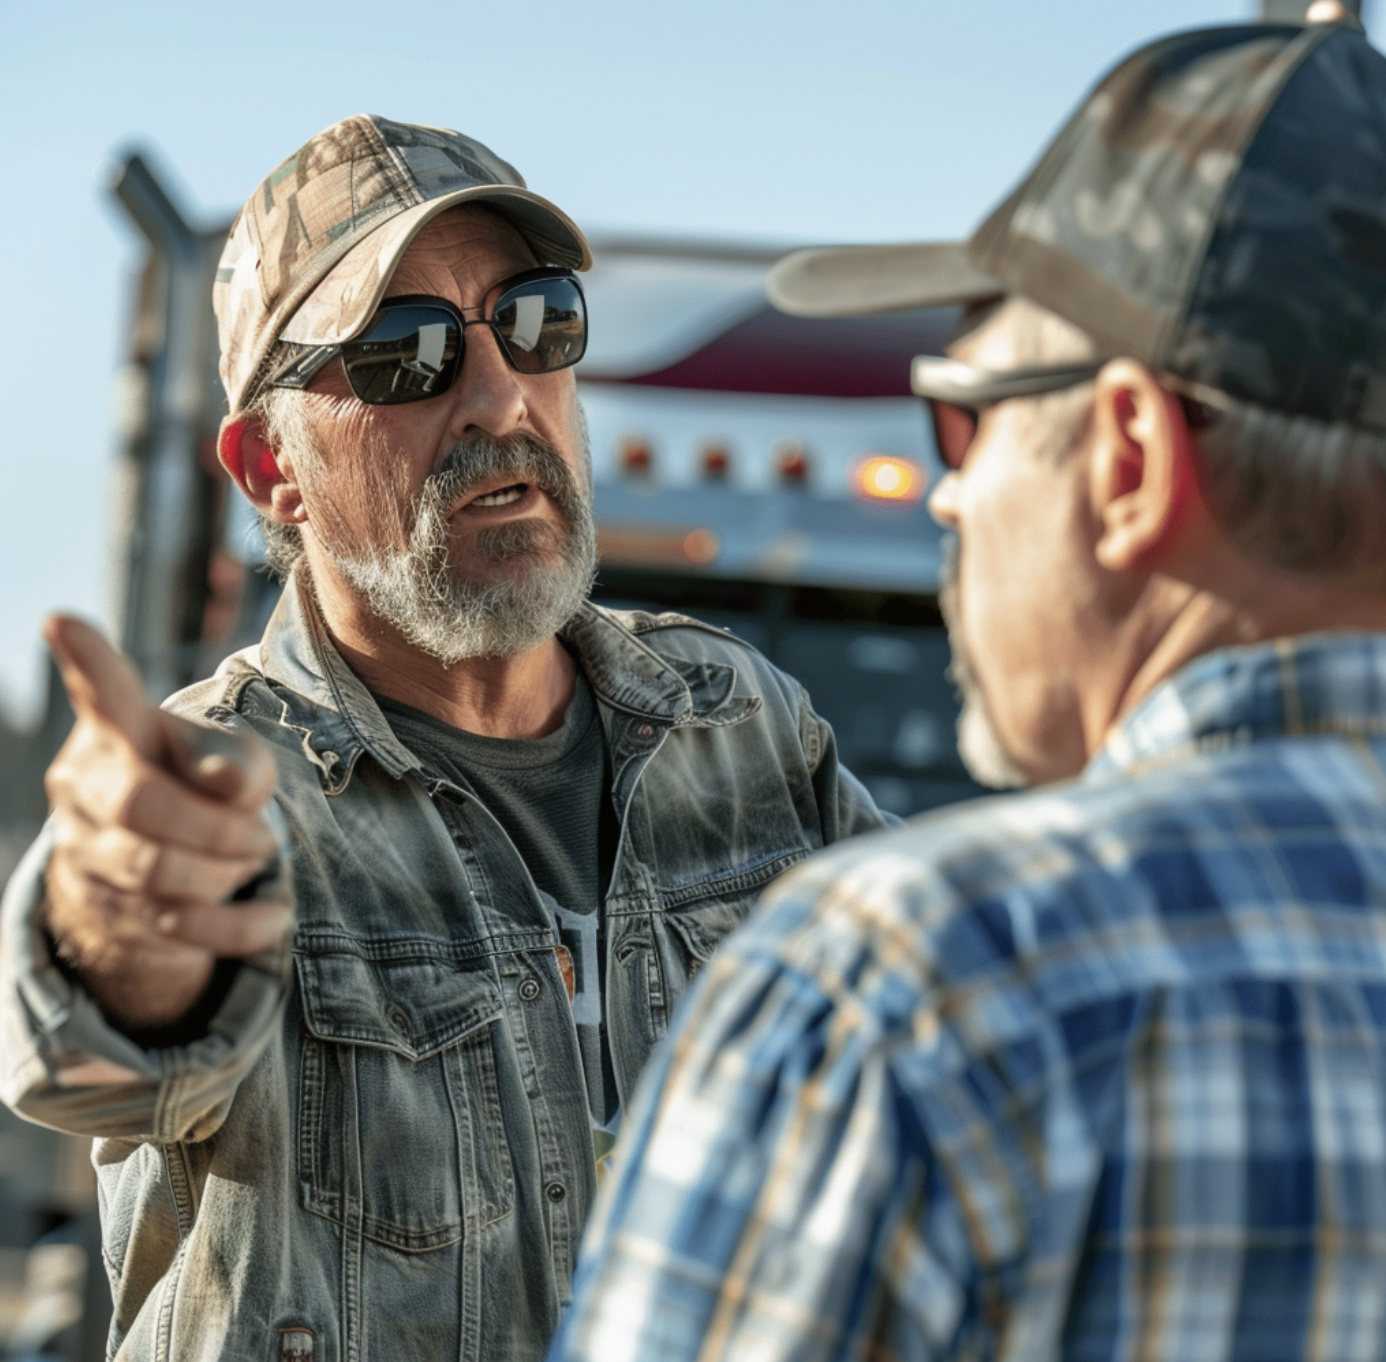 Super trucker telling another trucker what to do